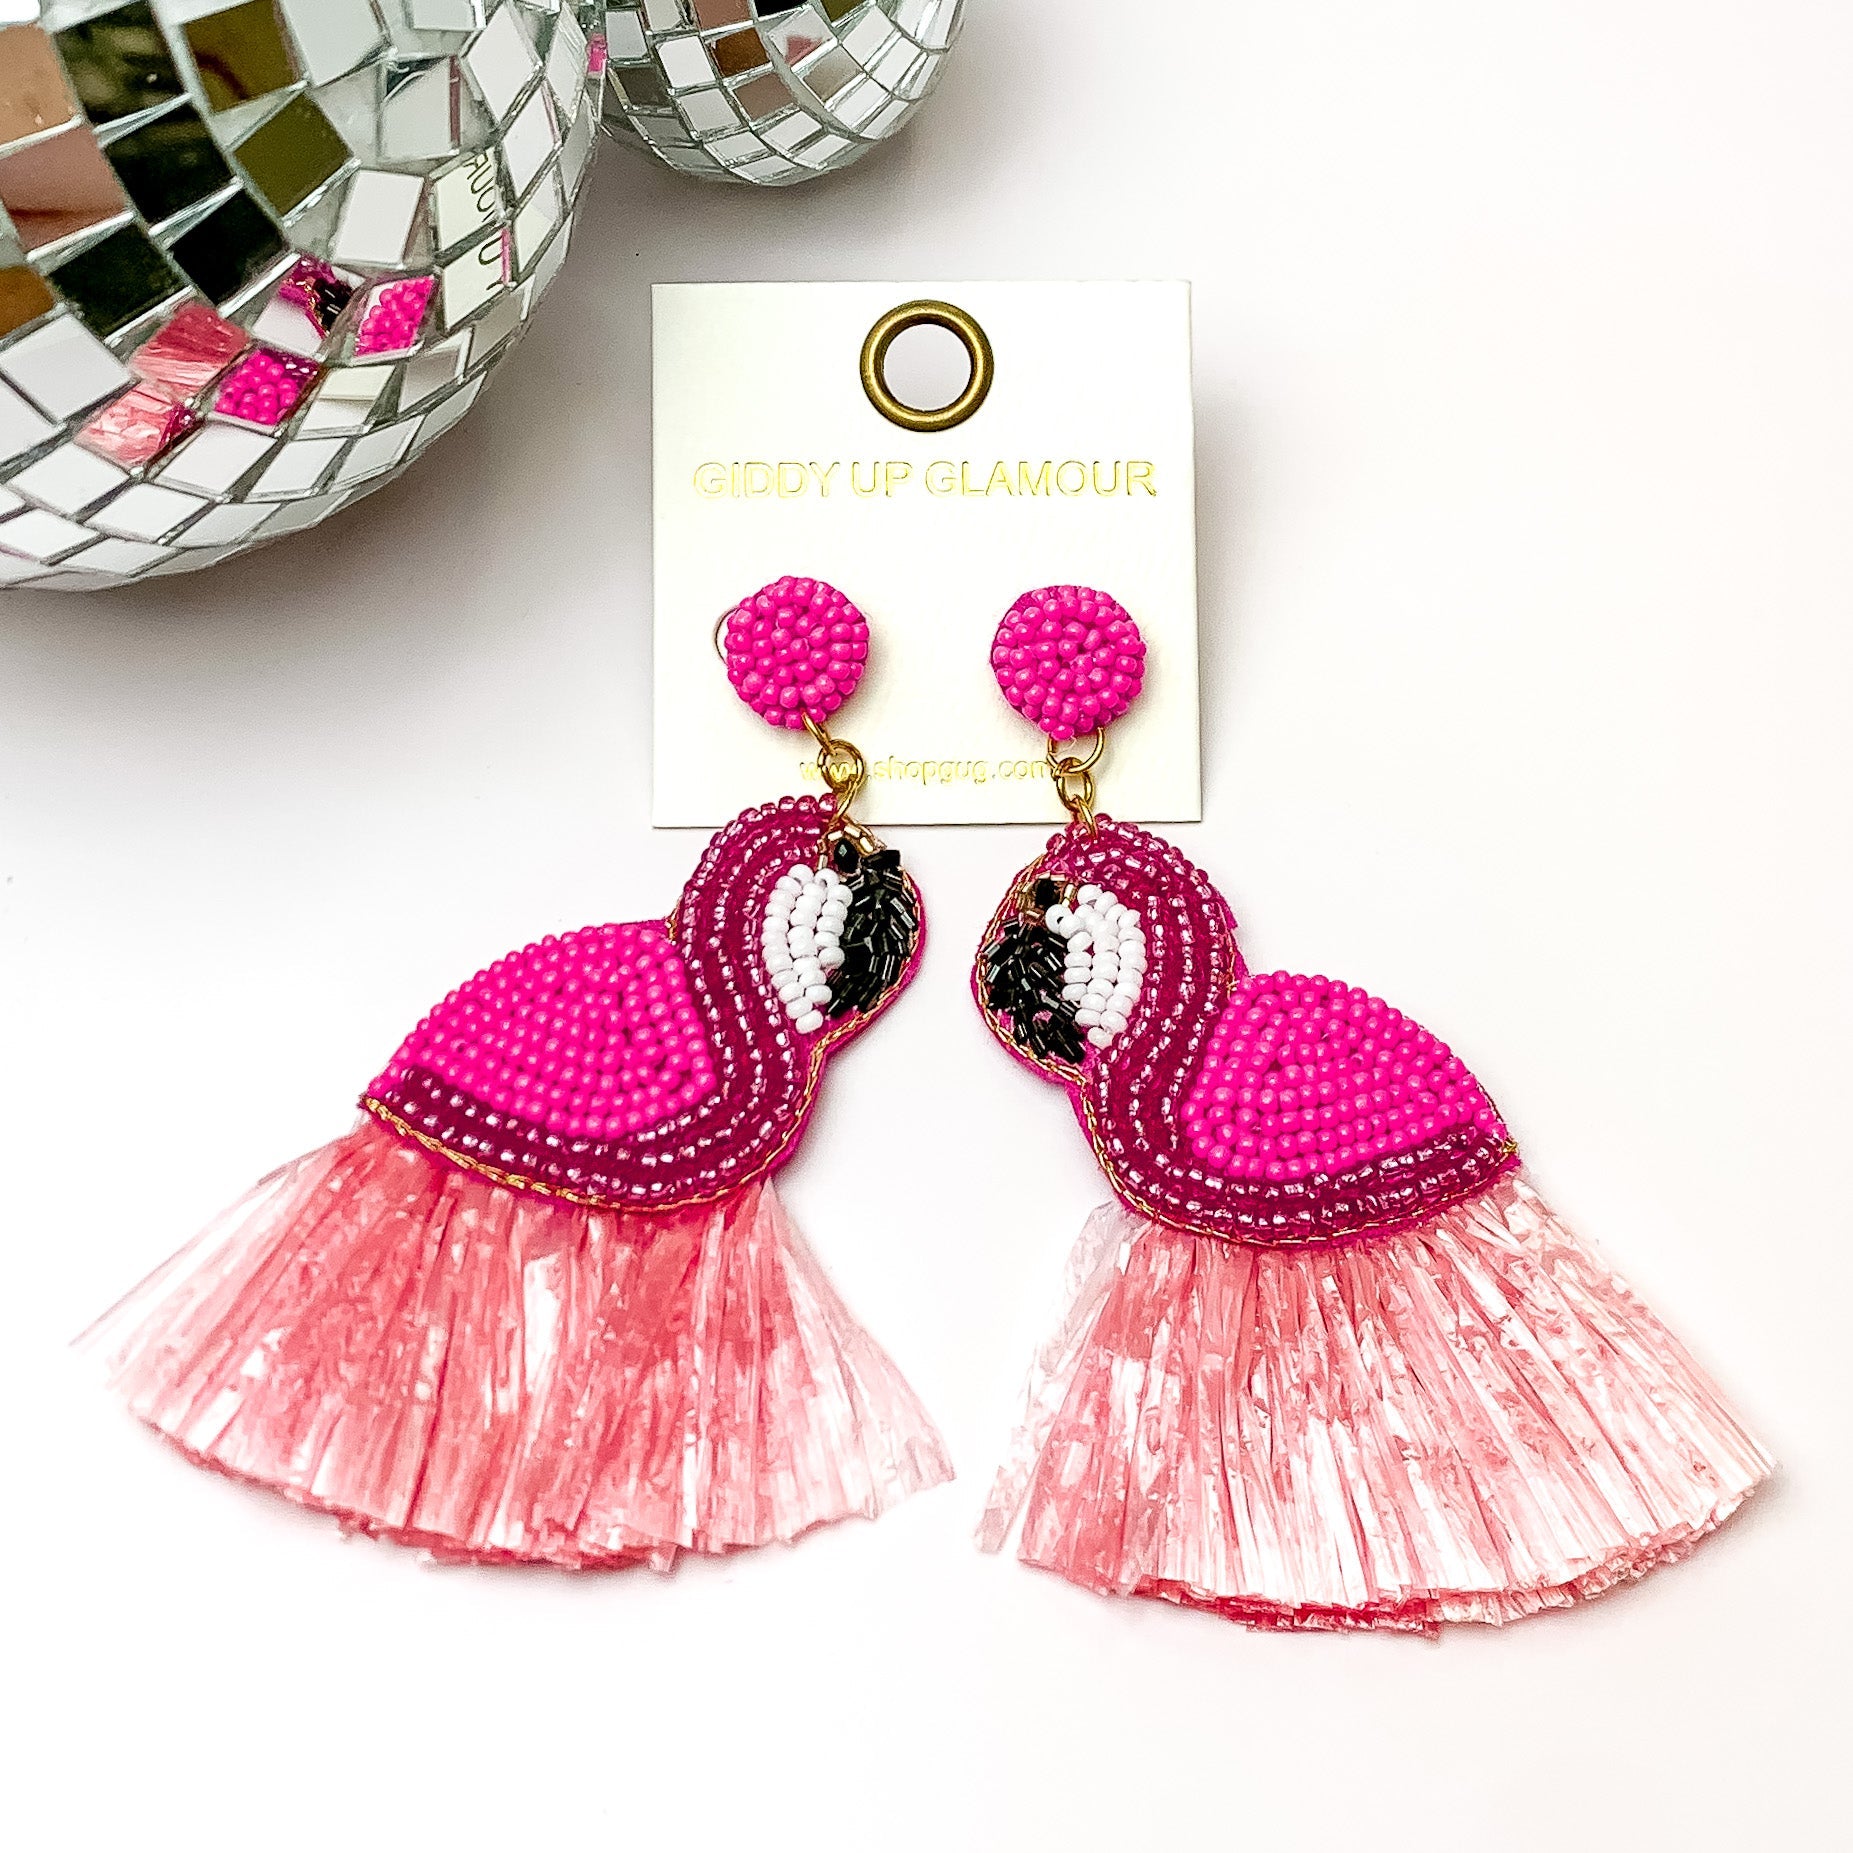 Statement pink flamingo earrings with pink fringe. Pictured on a white background with a disco ball at the top left.